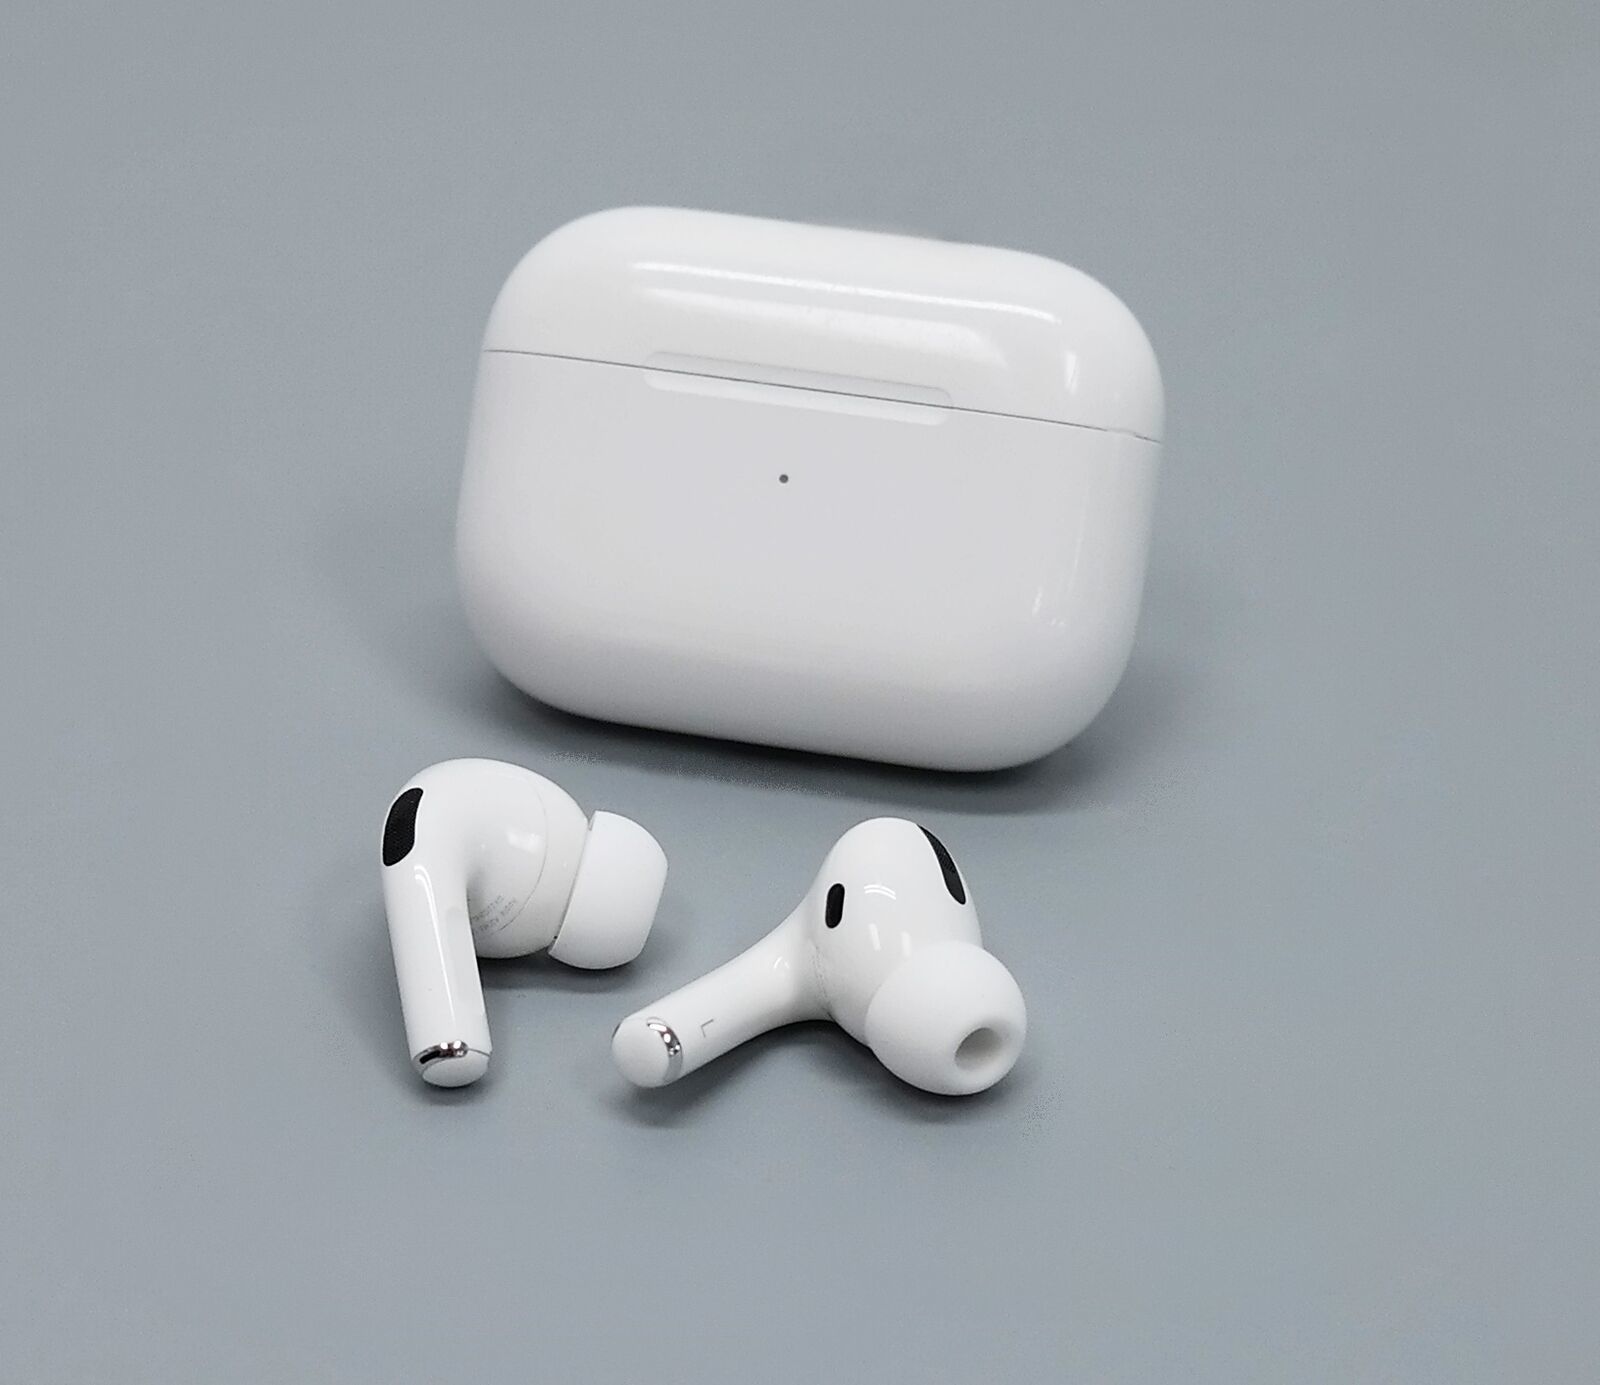 Genuine Apple AirPods Pro - White (MWP22AM/A) - Headsets